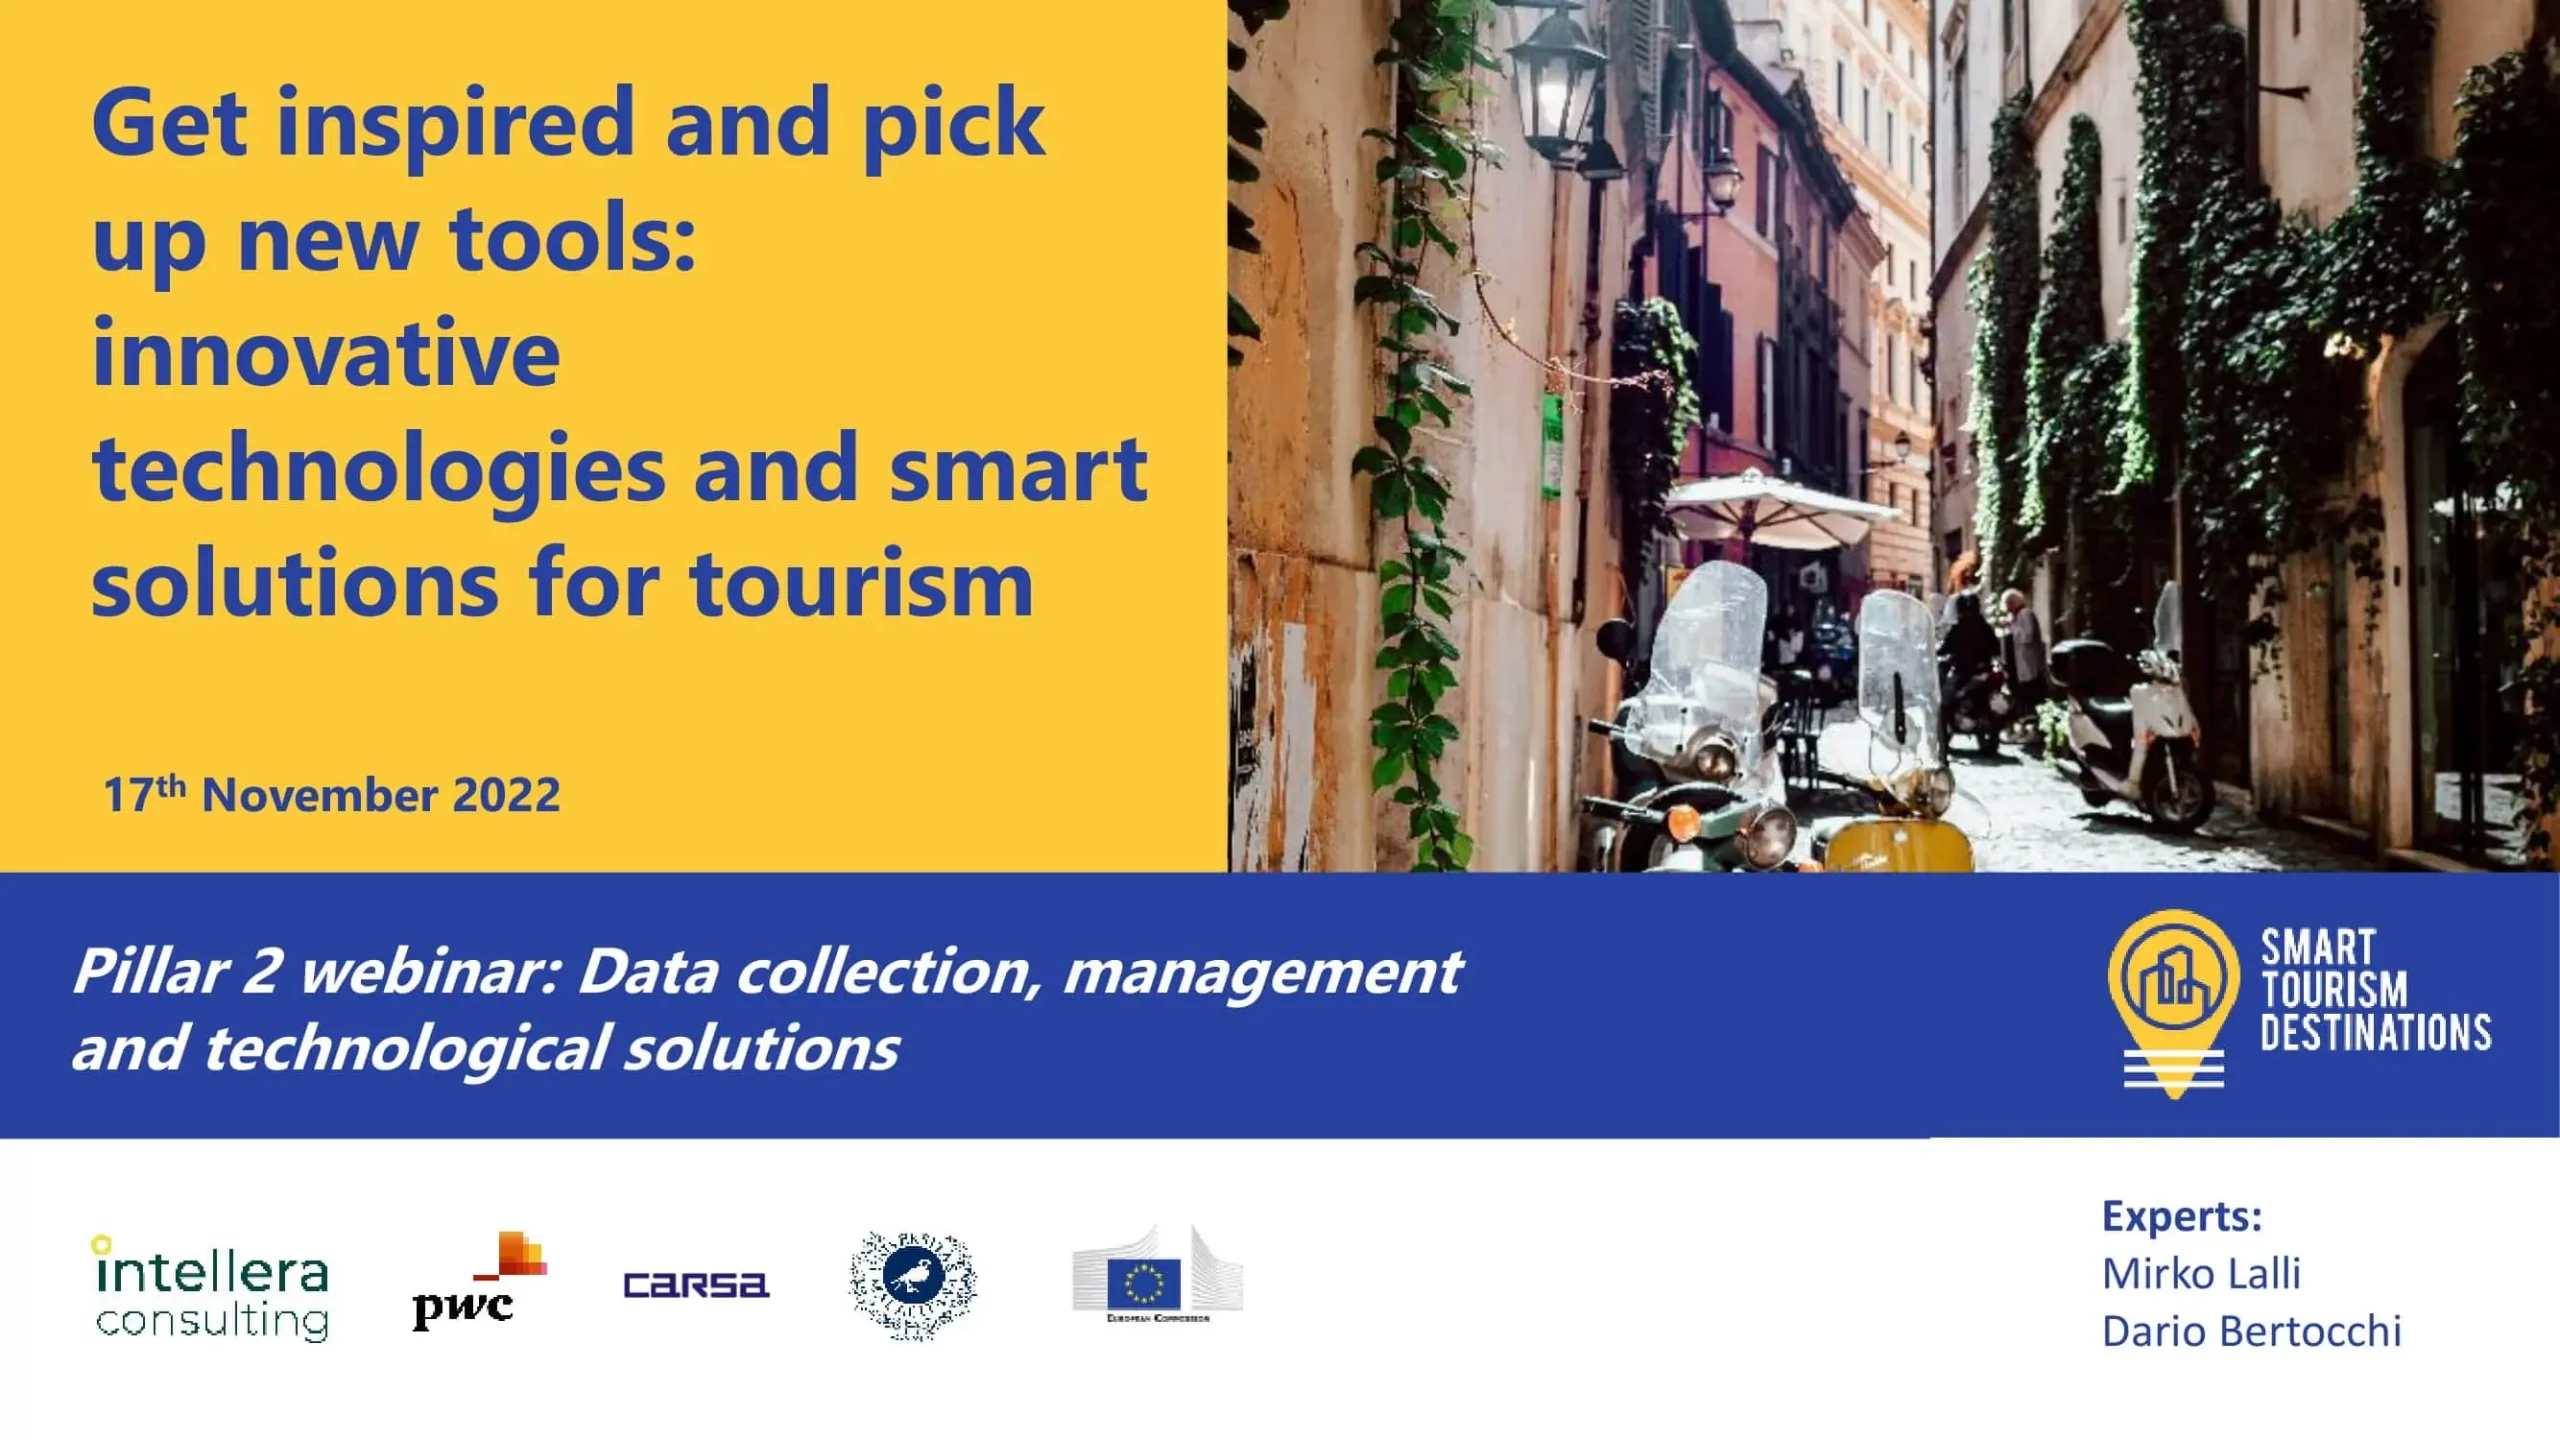 Get inspired and pick up new tools: innovative technologies and smart solutions for tourism